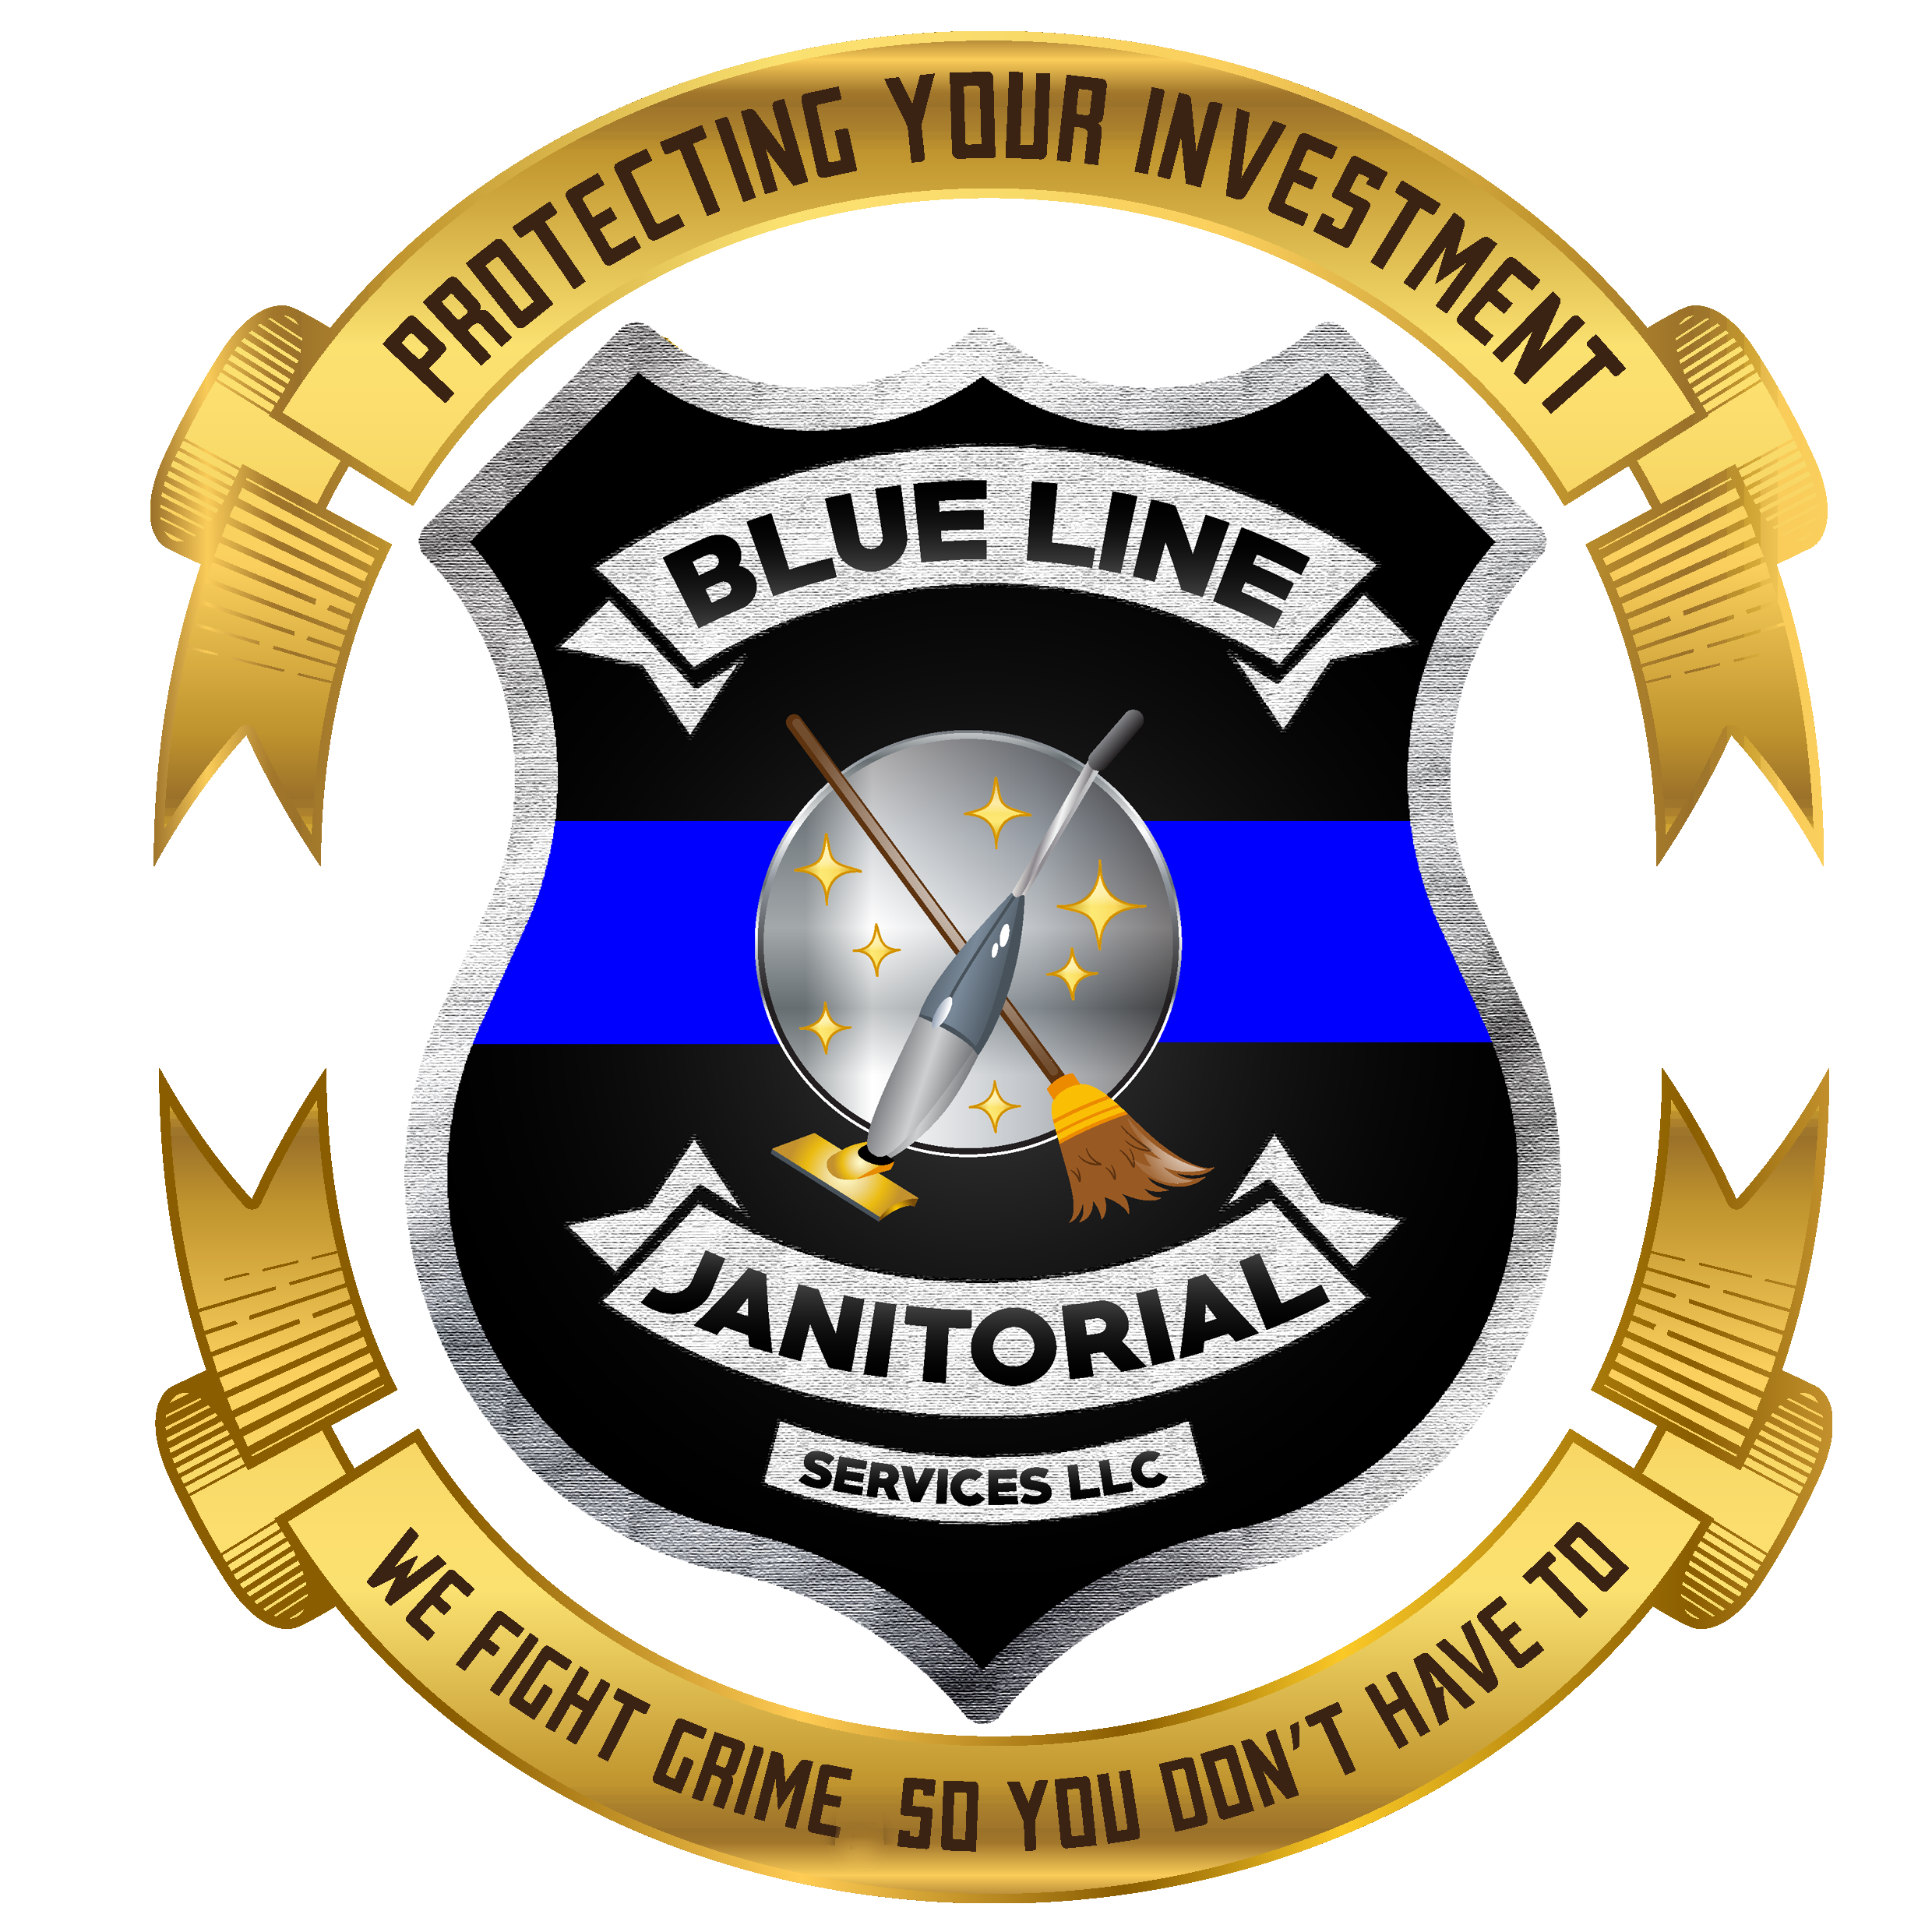 Blue Line Janitorial Services LLC